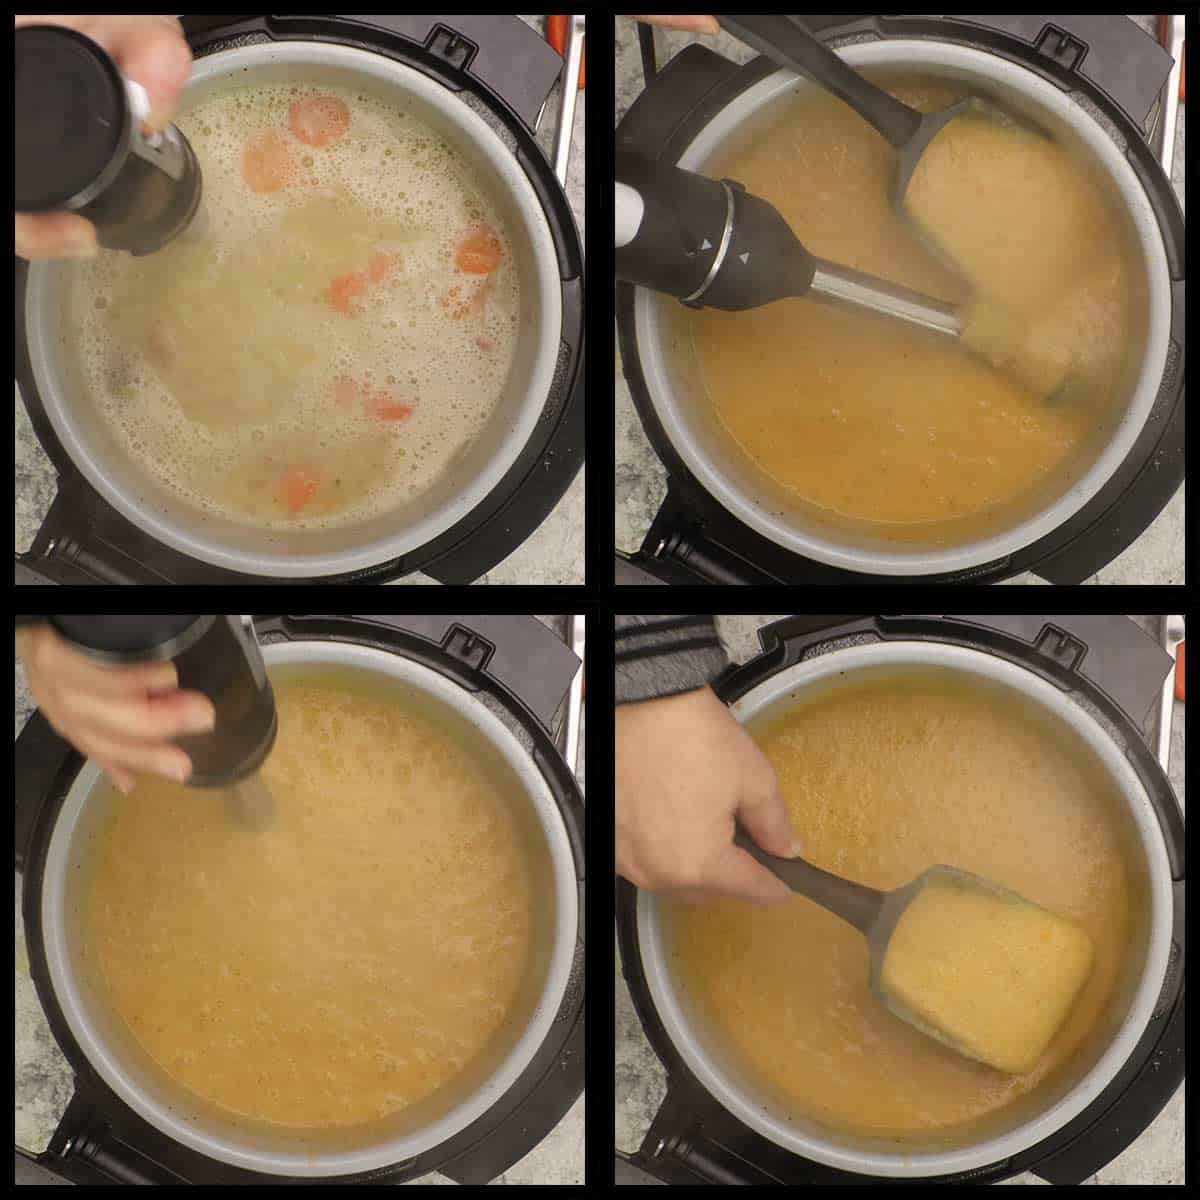 Blending the soup with an immersion blender.